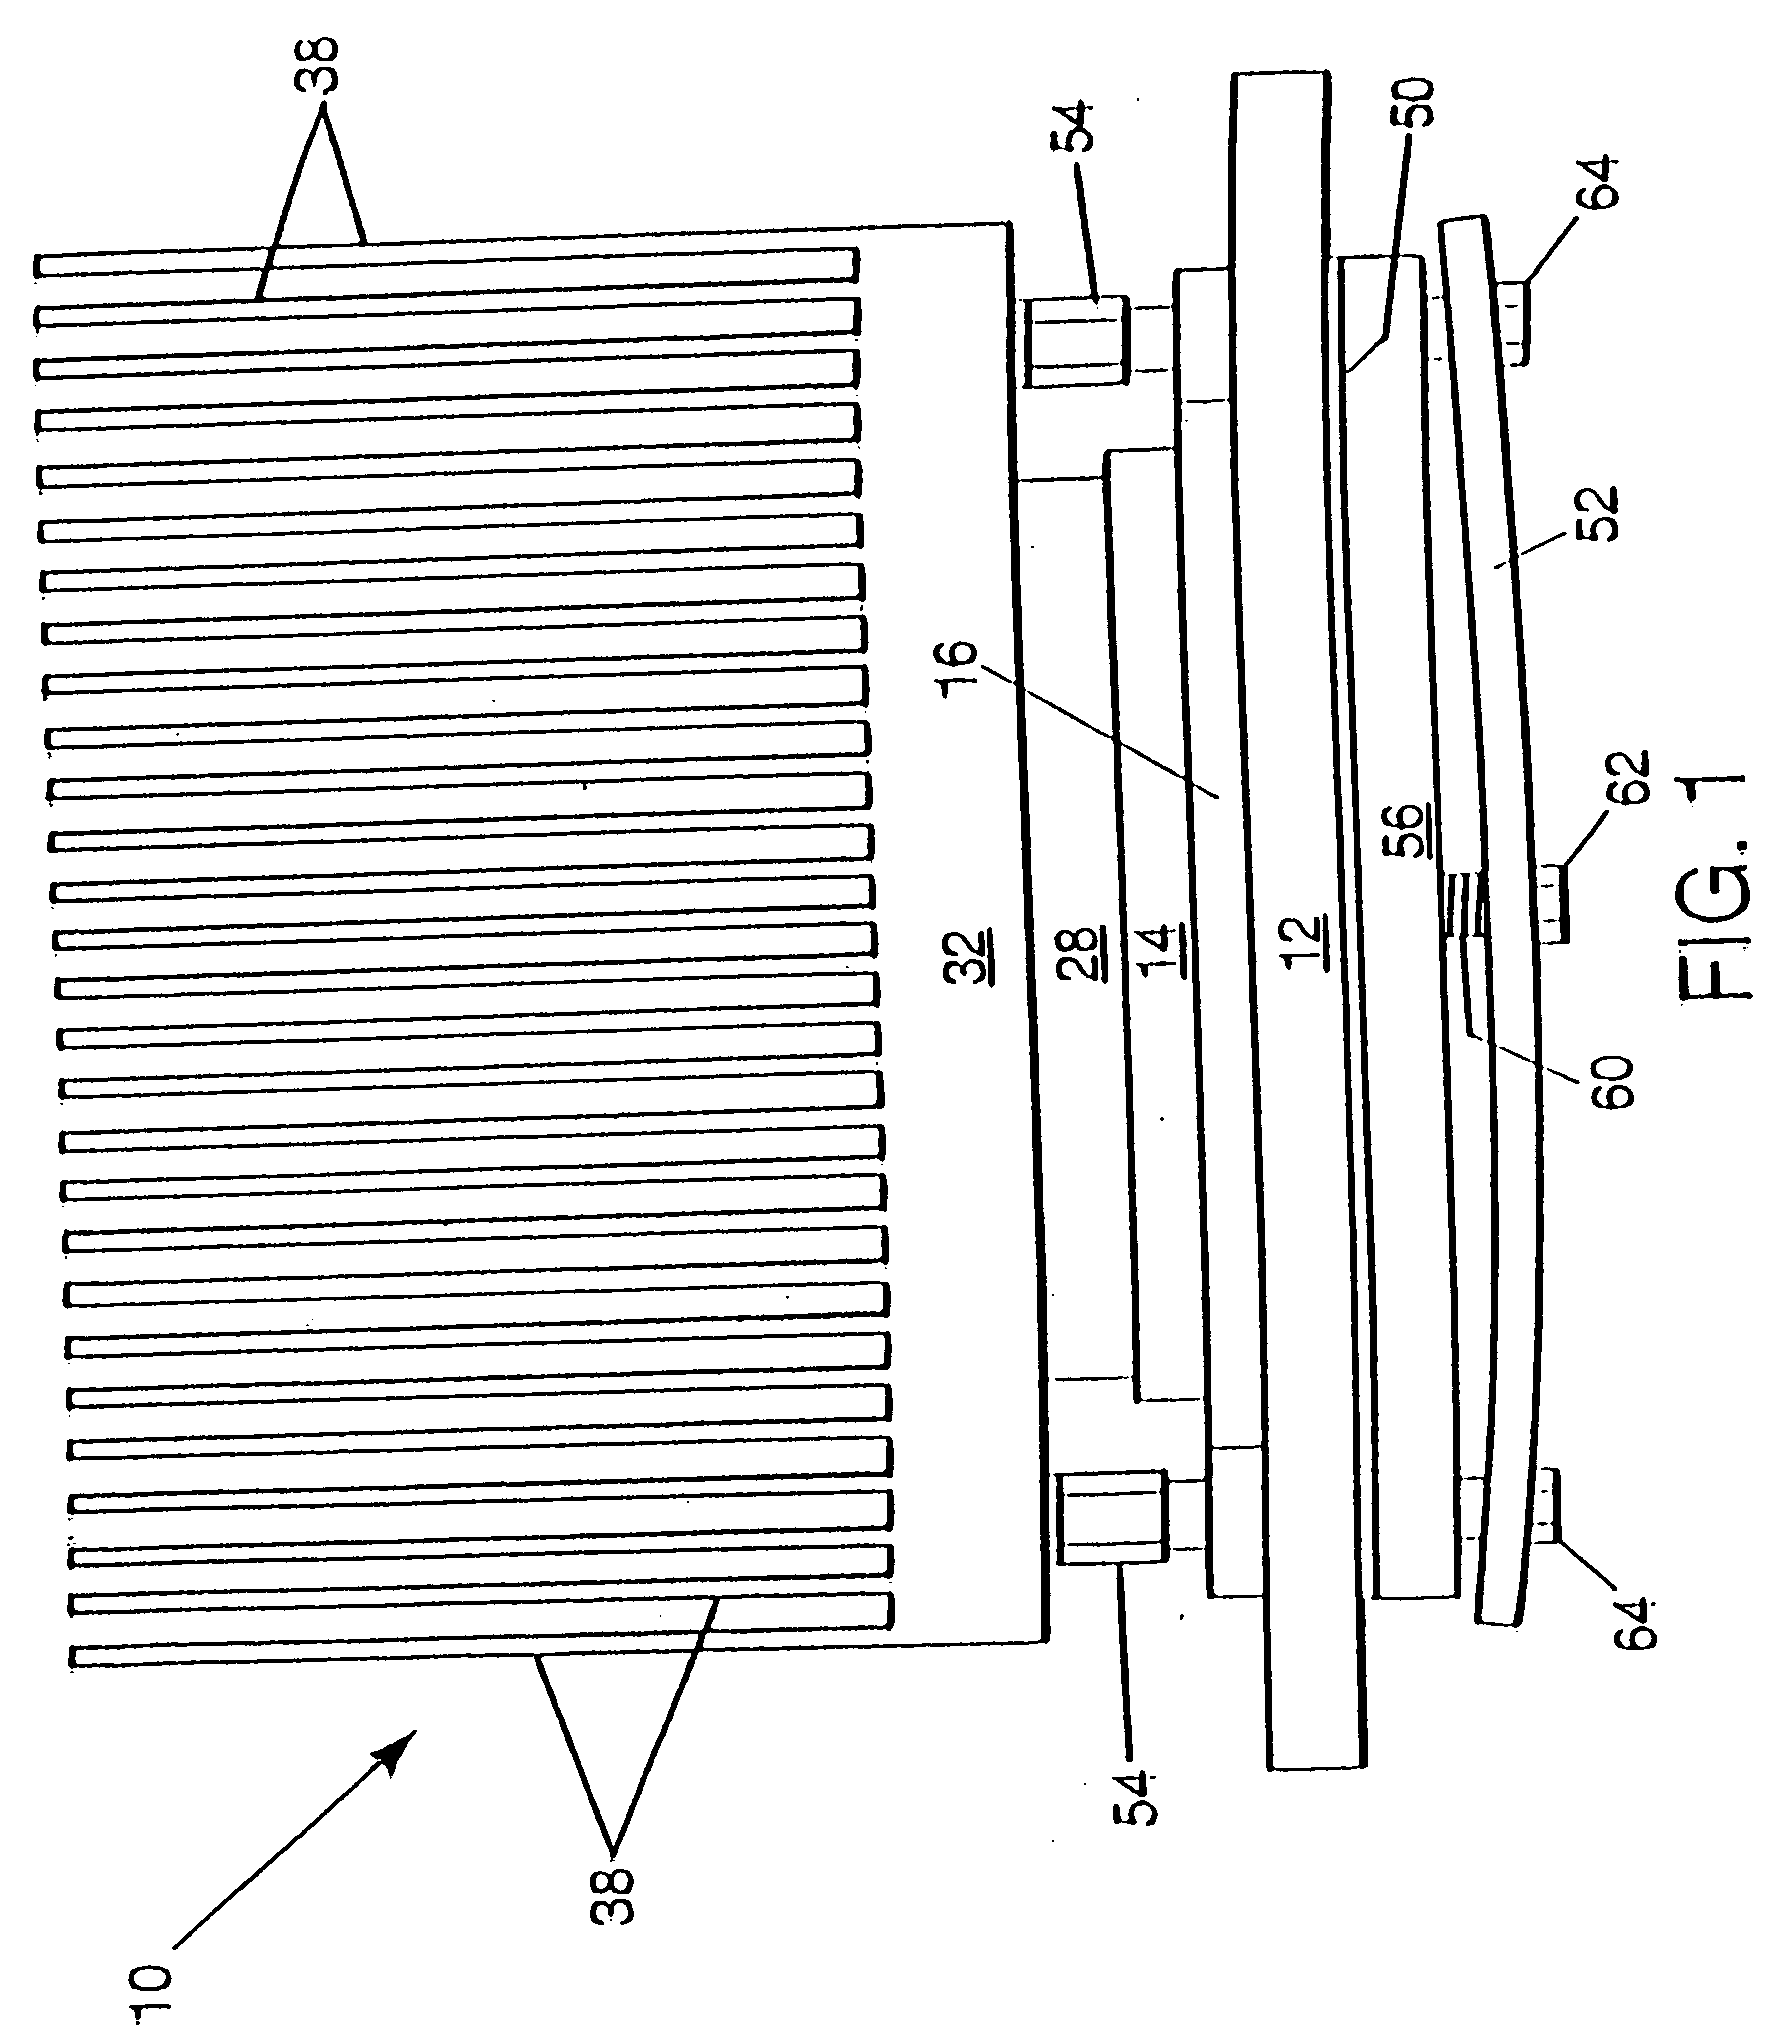 Structure for controlled shock and vibration of electrical interconnects